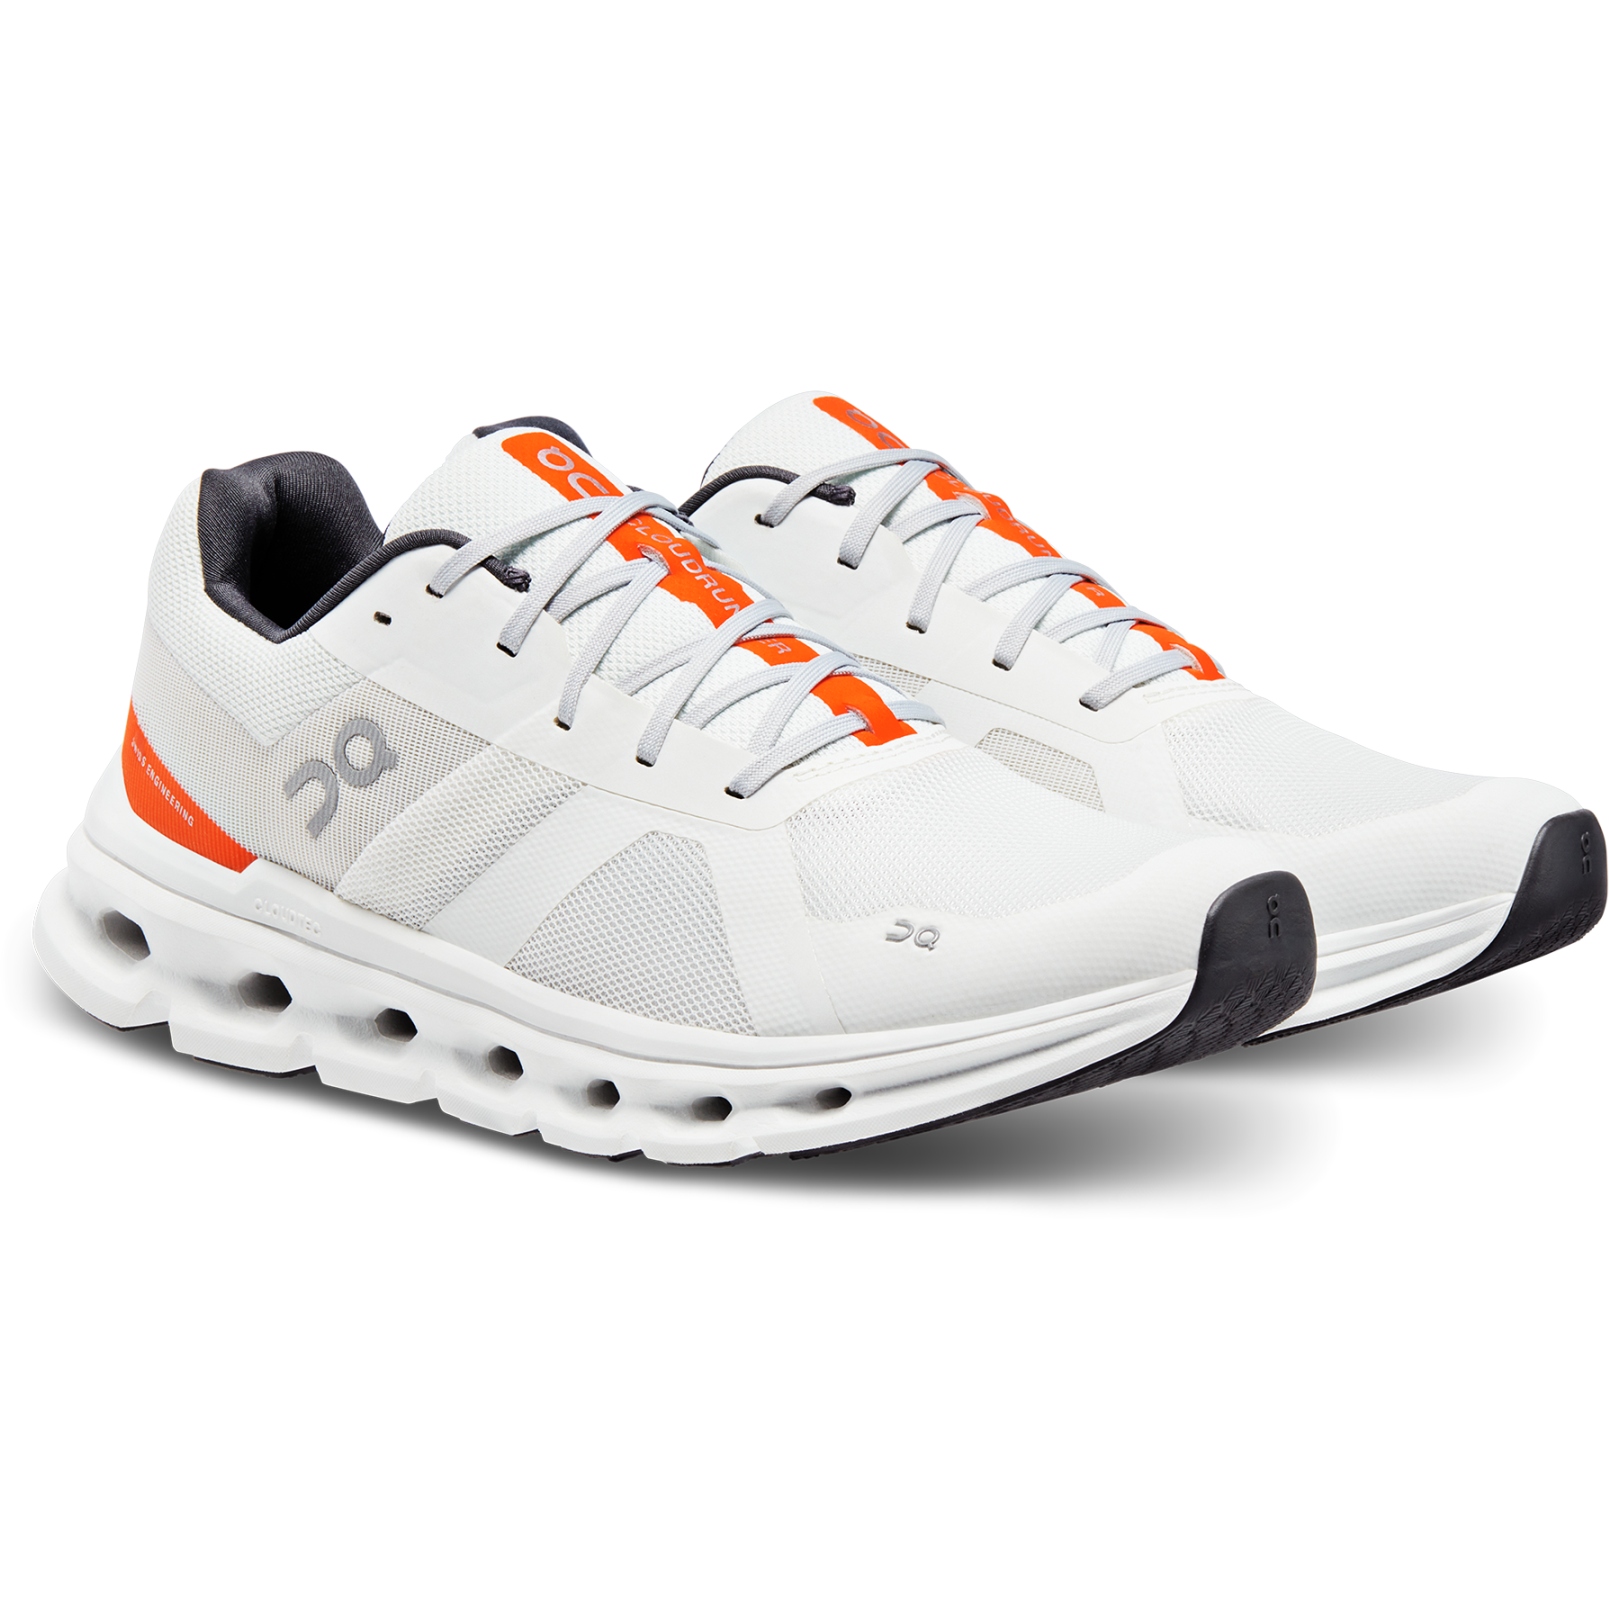 Productfoto van On Cloudrunner Wide Hardloopschoenen - Undyed-White &amp; Flame